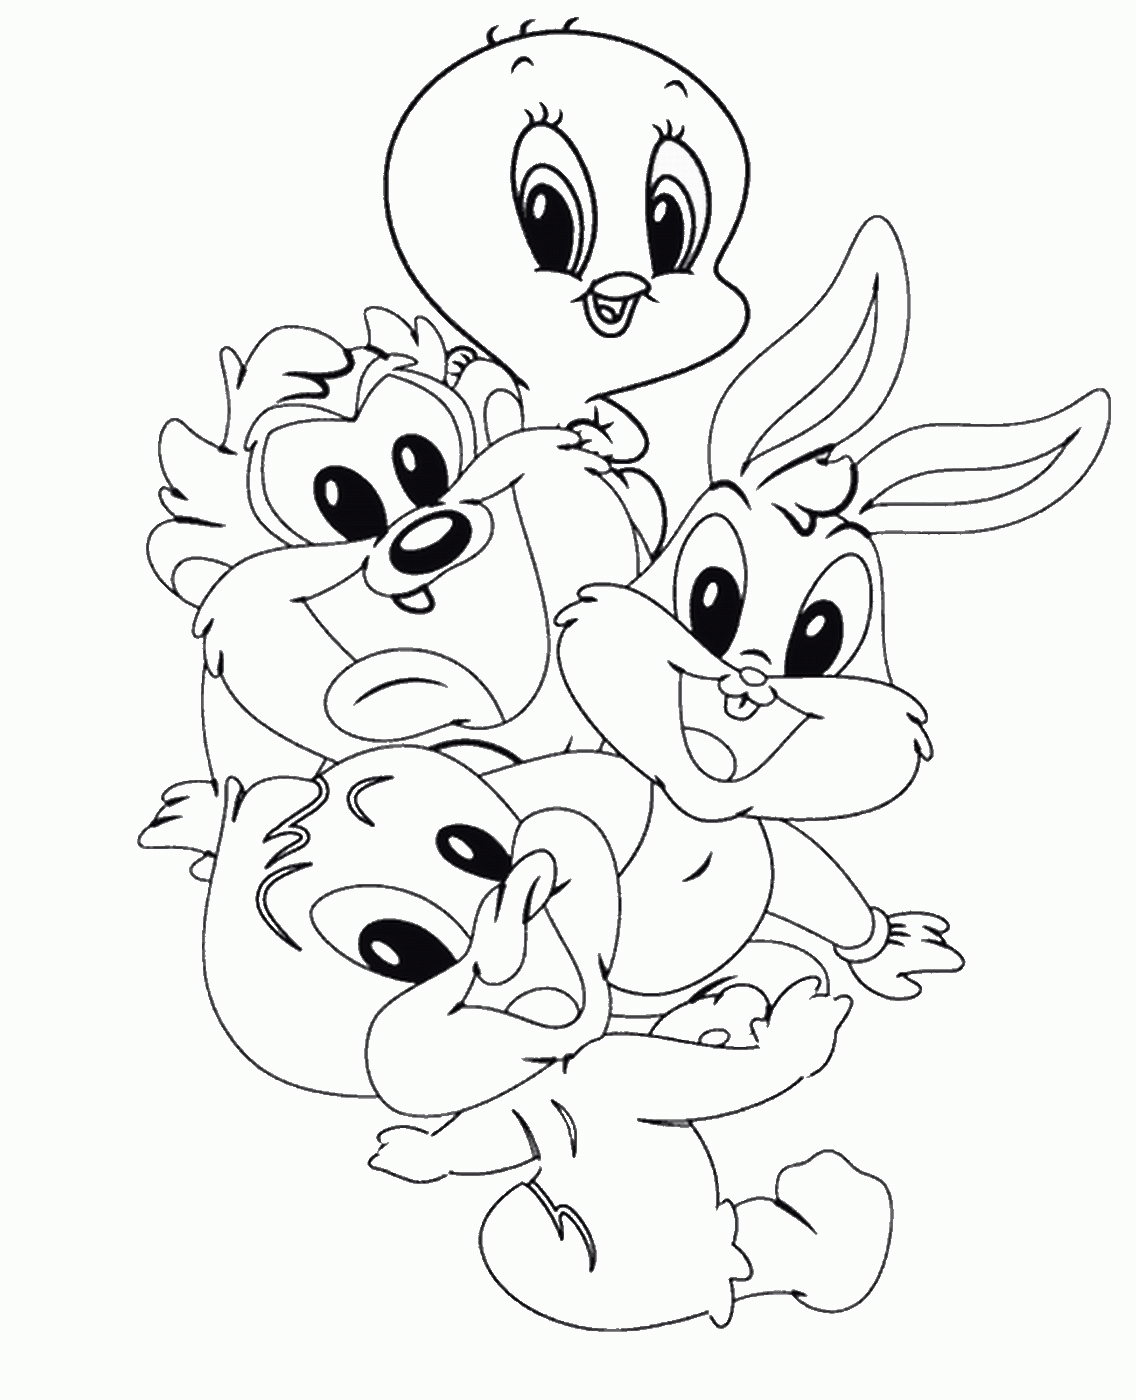 coloring pages for baby looney tunes